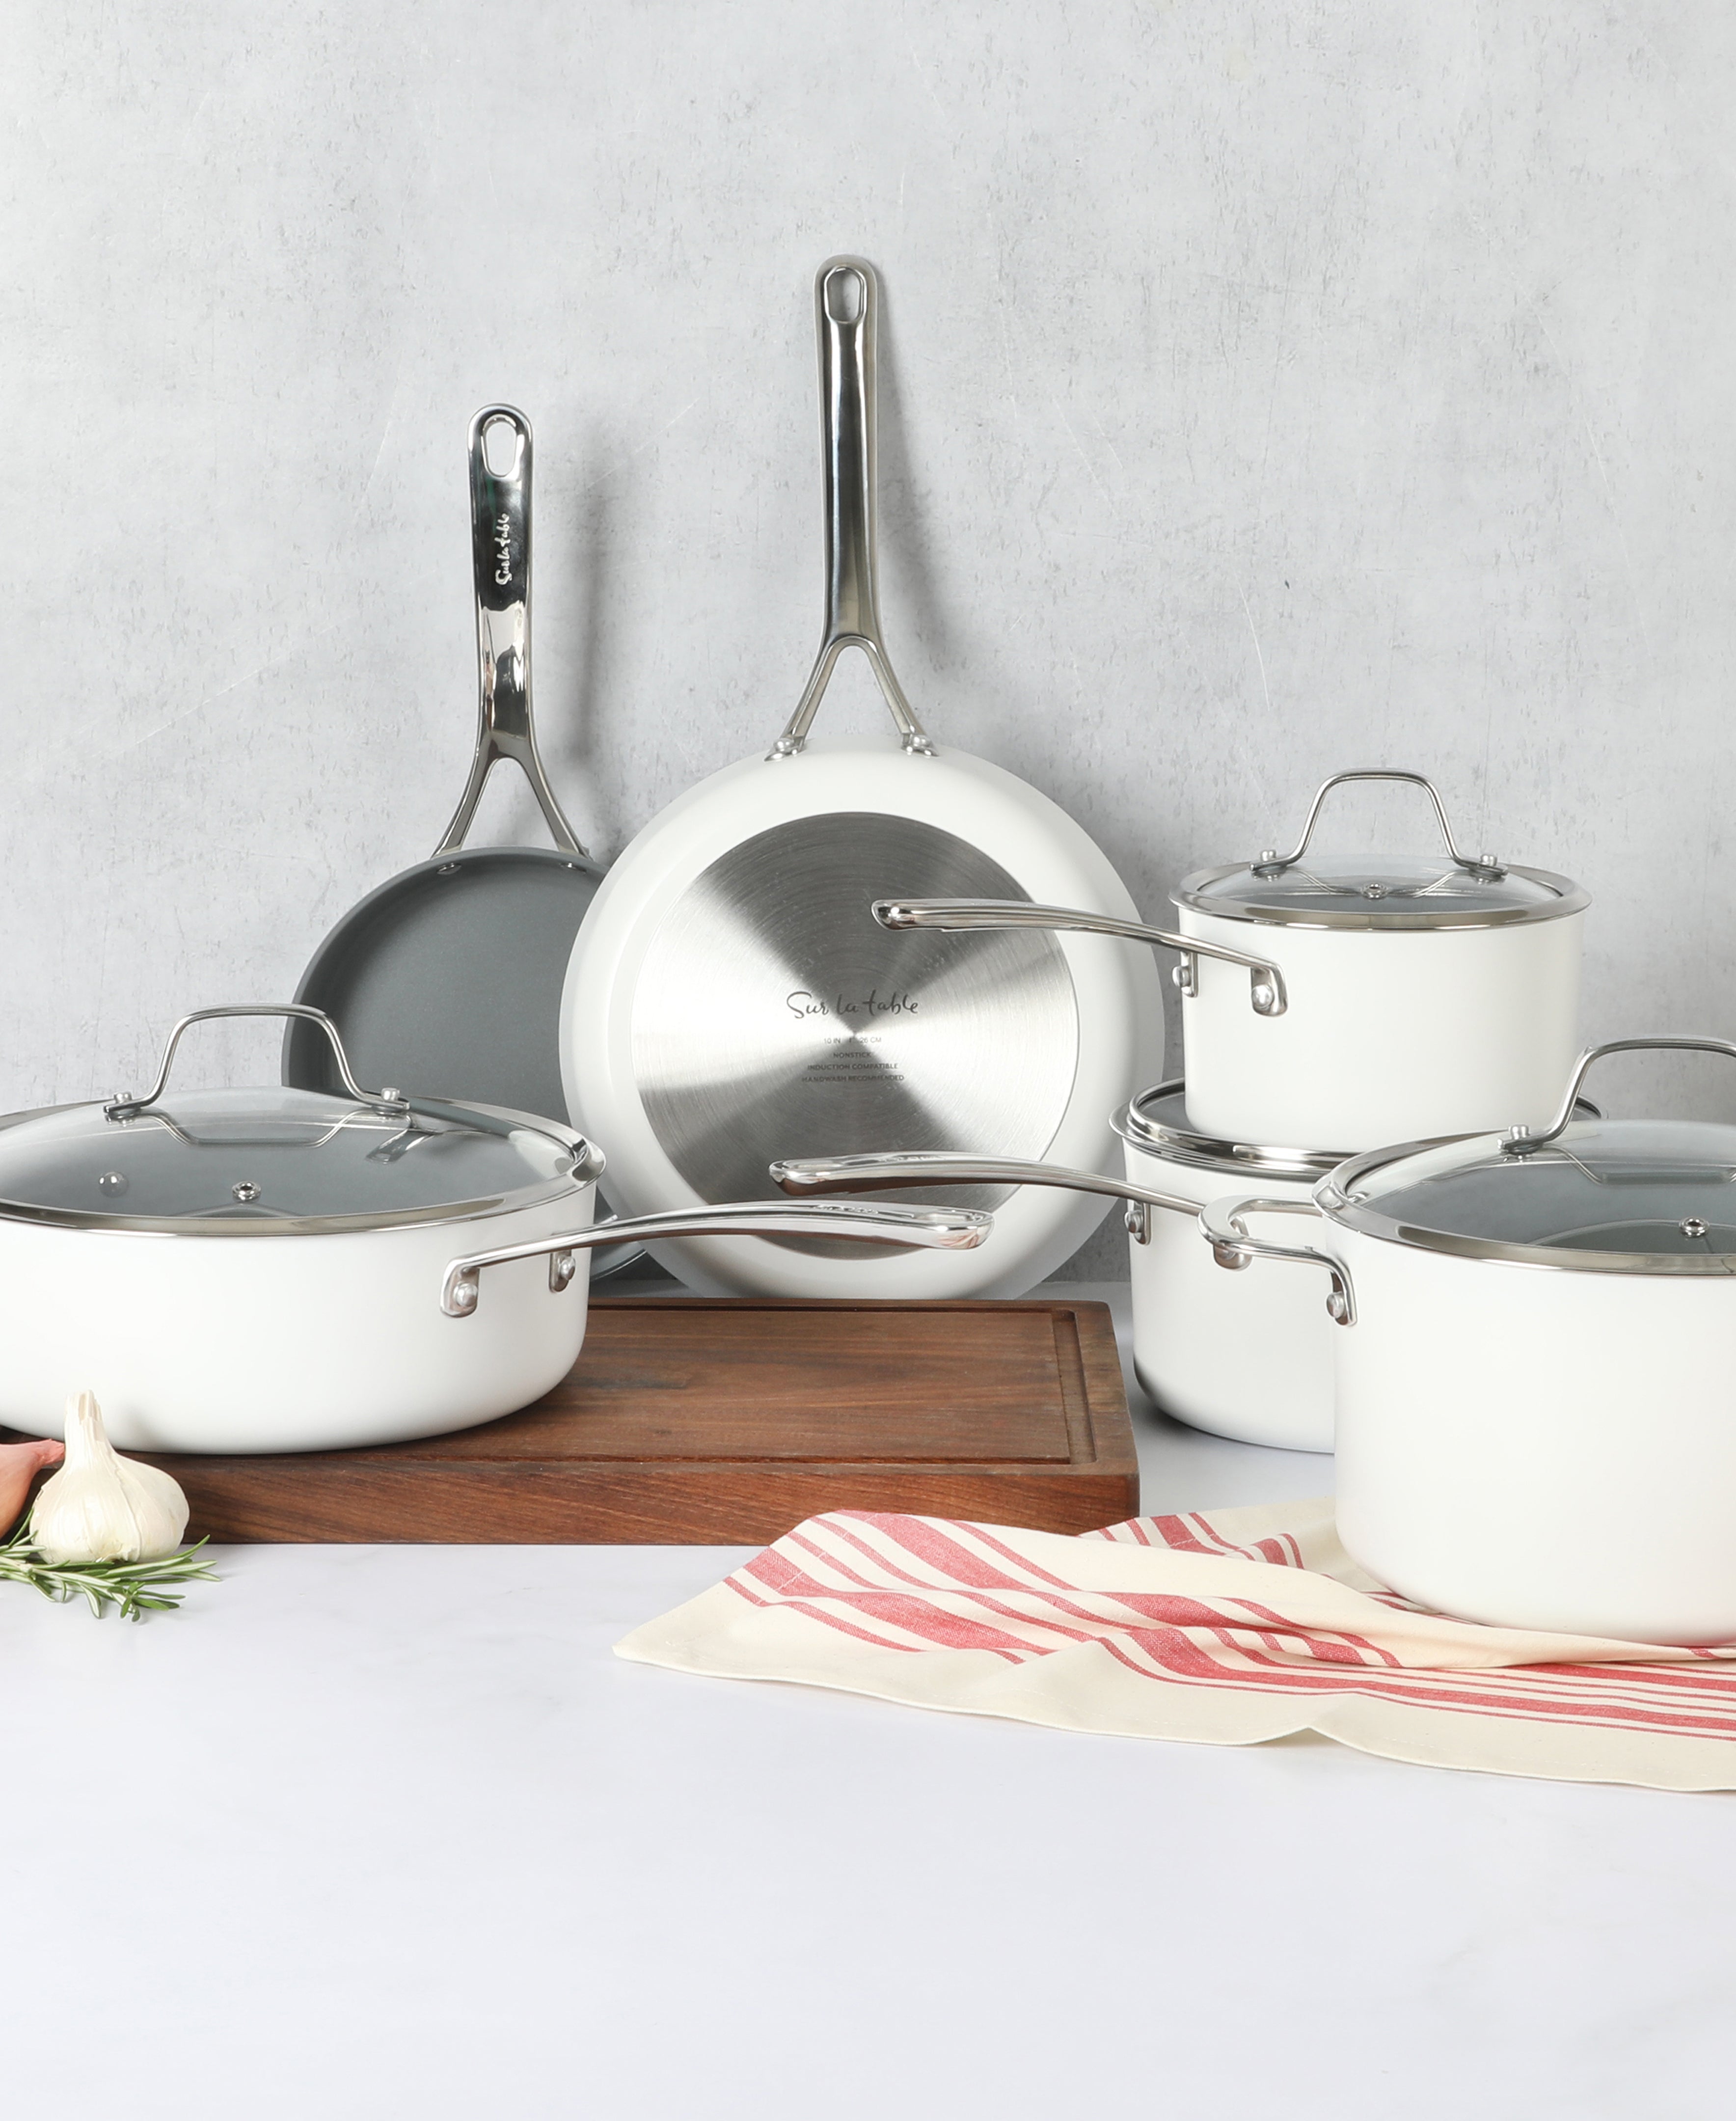 Pots and Pans Set Nonstick, White Granite Induction Kitchen